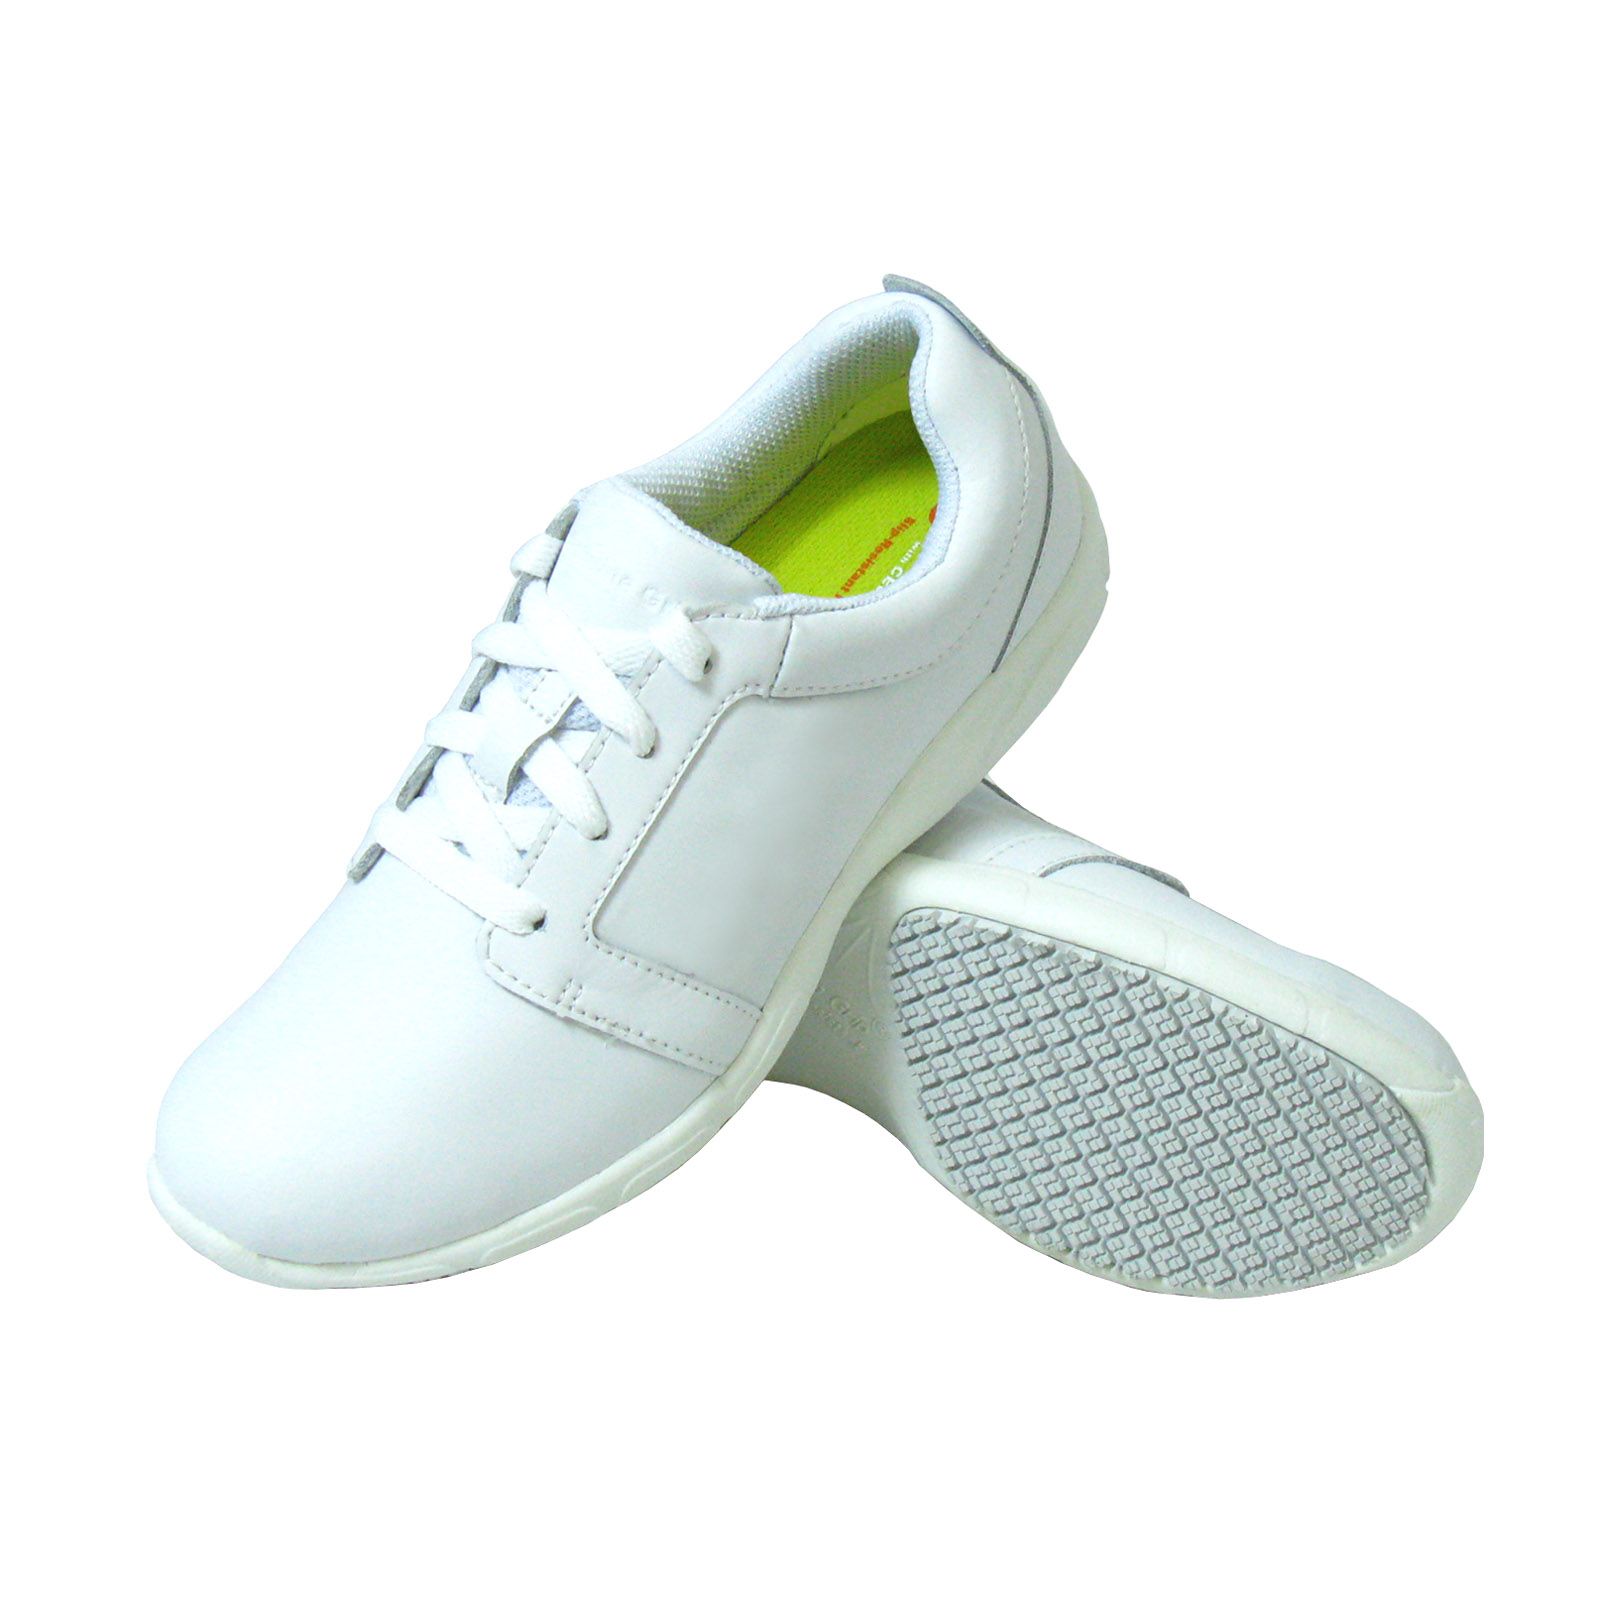 Genuine Grip Women Slip-Resistant Oxfords Casual Shoes #325 White Leather